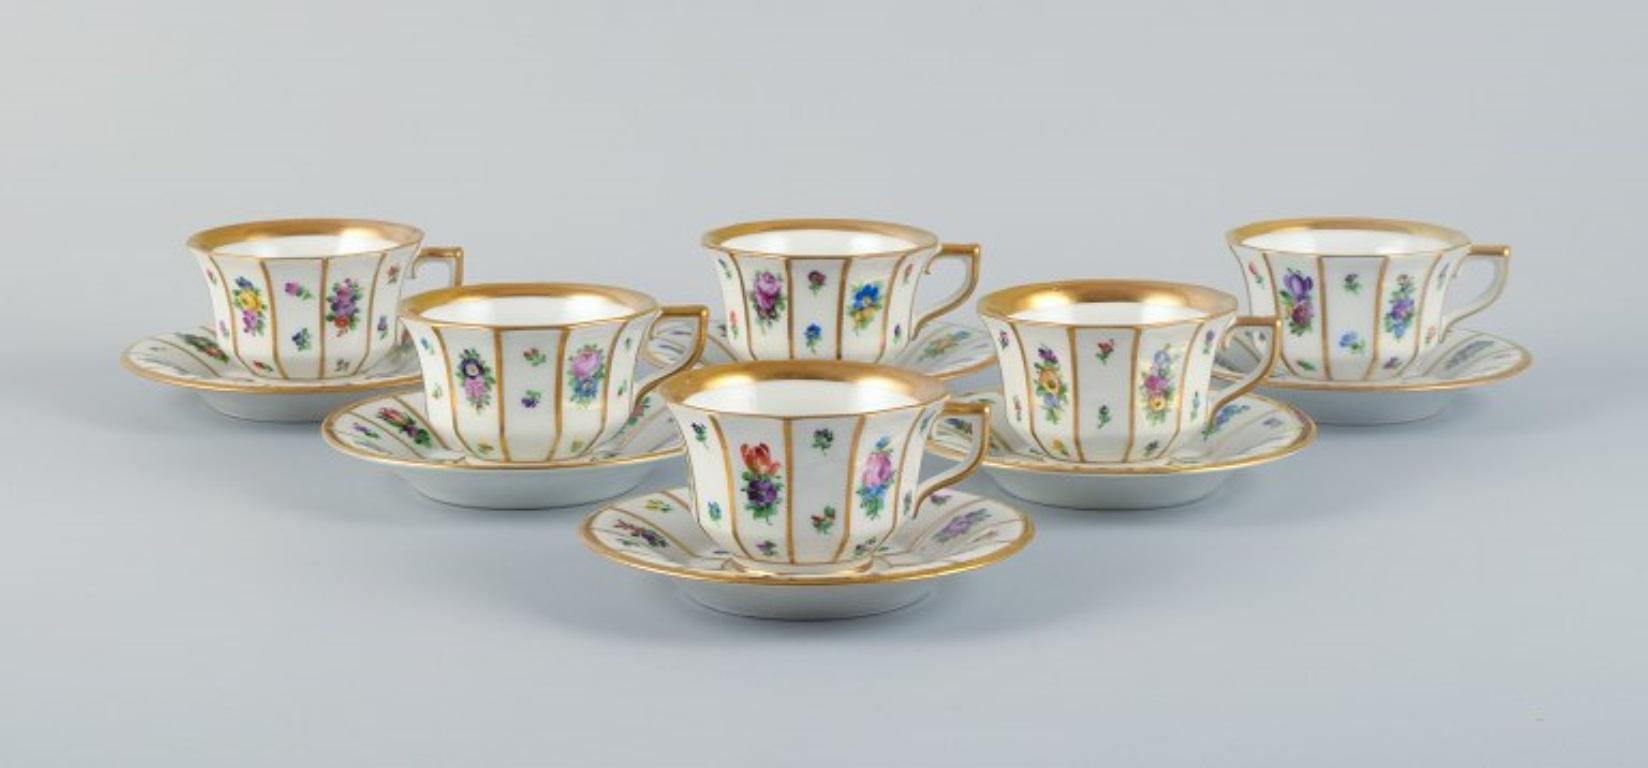 Royal Copenhagen, six Henriette mocha cups and saucers hand-painted with flowers and gold decoration.
Model: 444/8562
Approx. 1930.
First factory quality.
In excellent condition.
Marked.
Cup: D 7.7 cm. (without handle) x H 5.2 cm.
Saucer: D 12.2 cm.